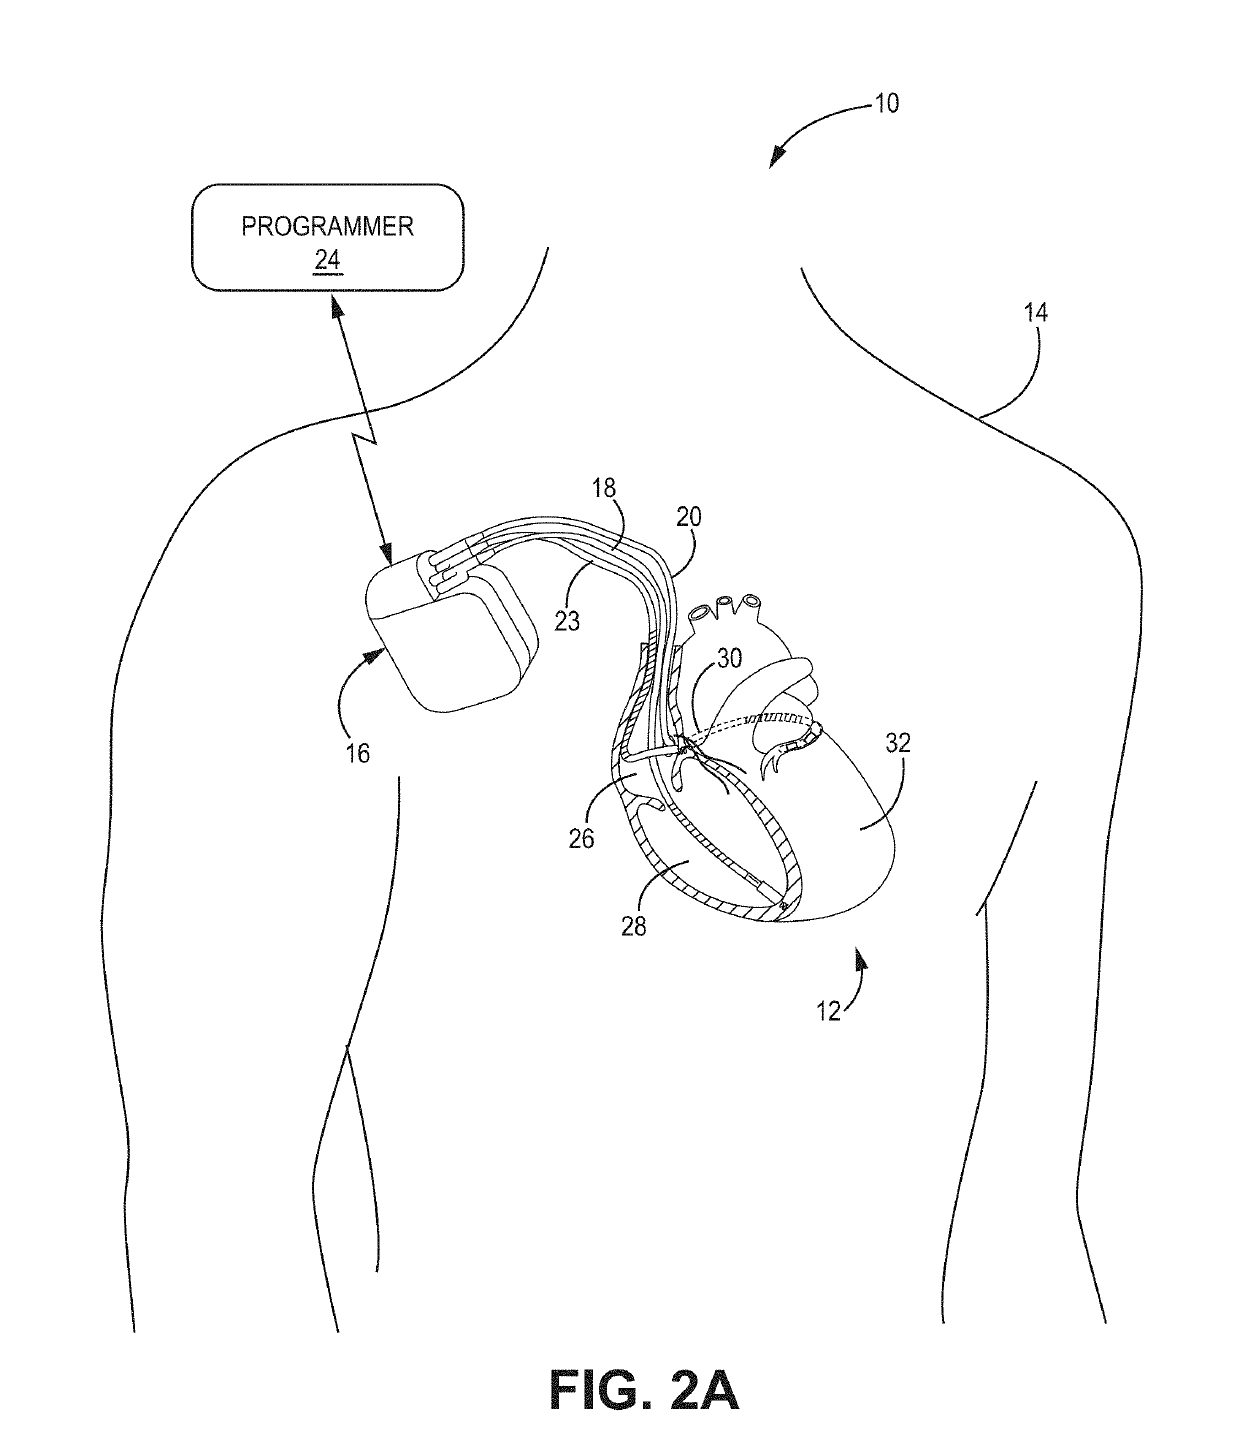 Bundle branch pacing devices and methods